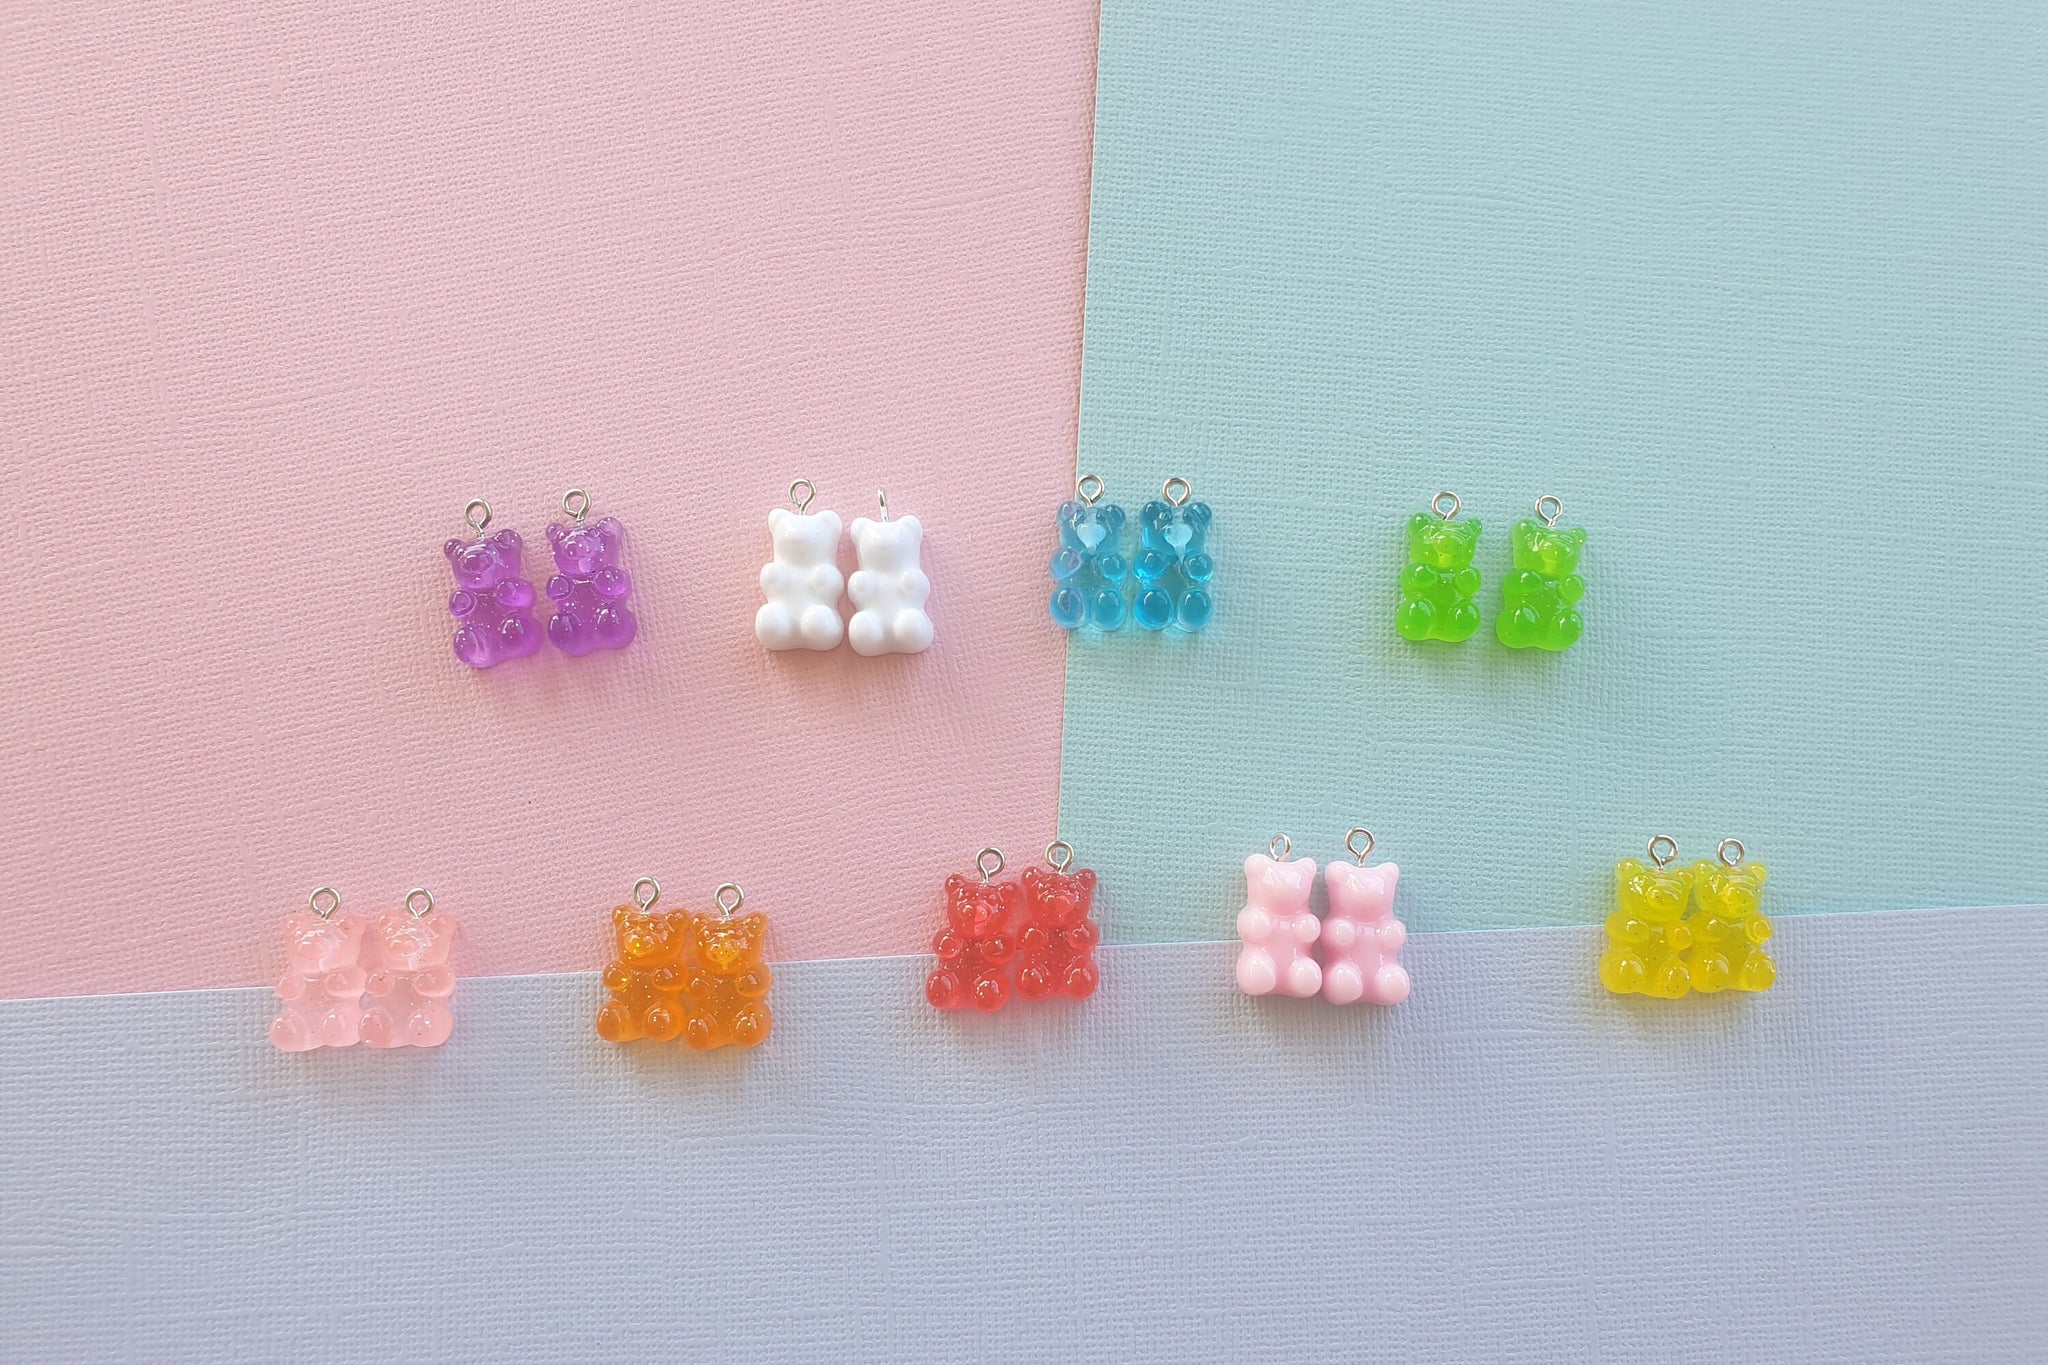 18pcs (9prs) Resin Gummy Bear with hook, Pendants DIY, Craft Supplies, Key Chain Making, Arts Jewellery Accessories and supplies australia